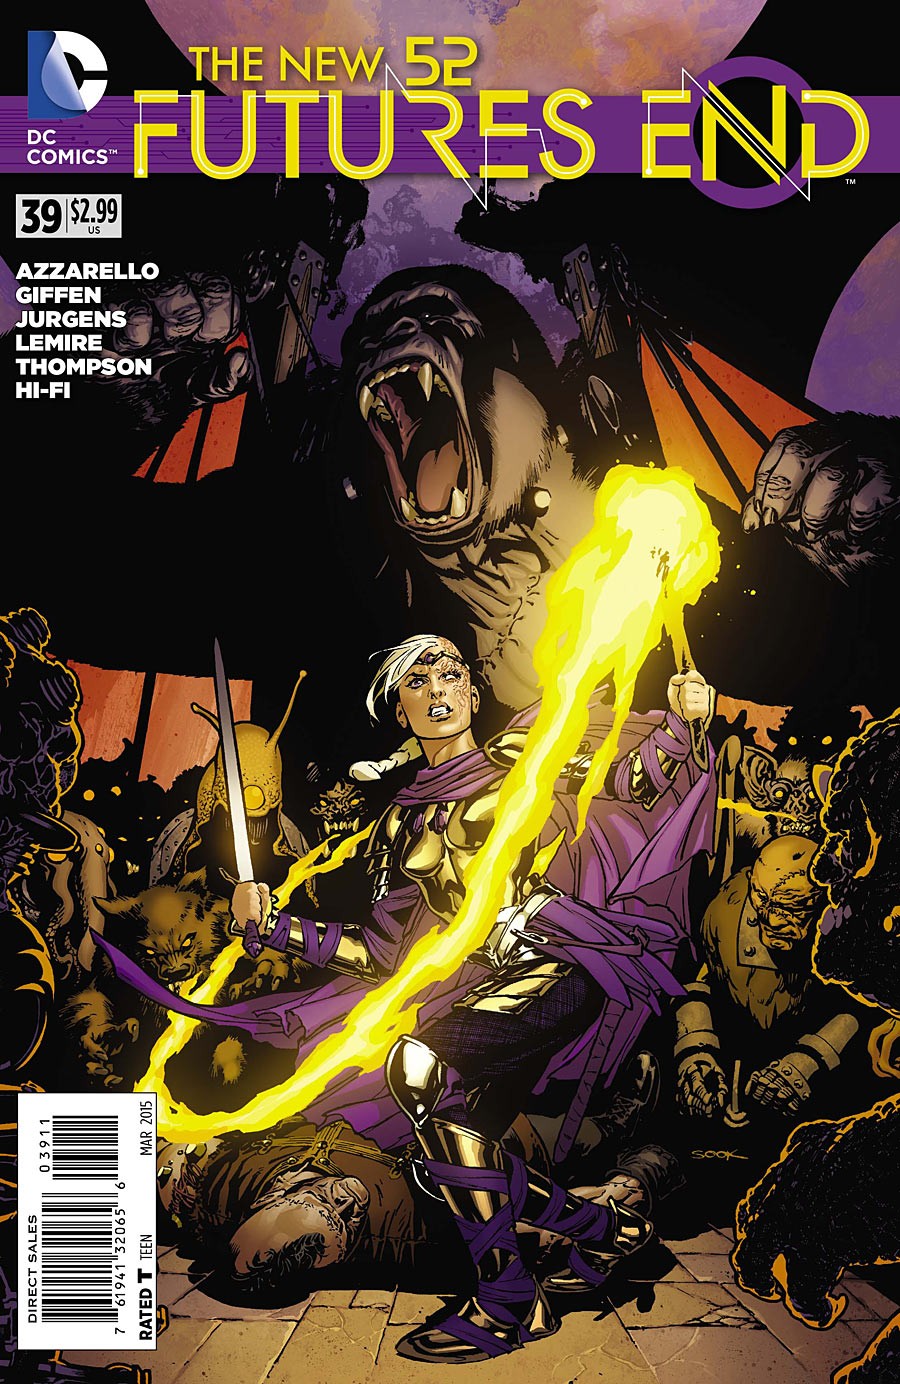 The New 52: Futures End Vol. 1 #39